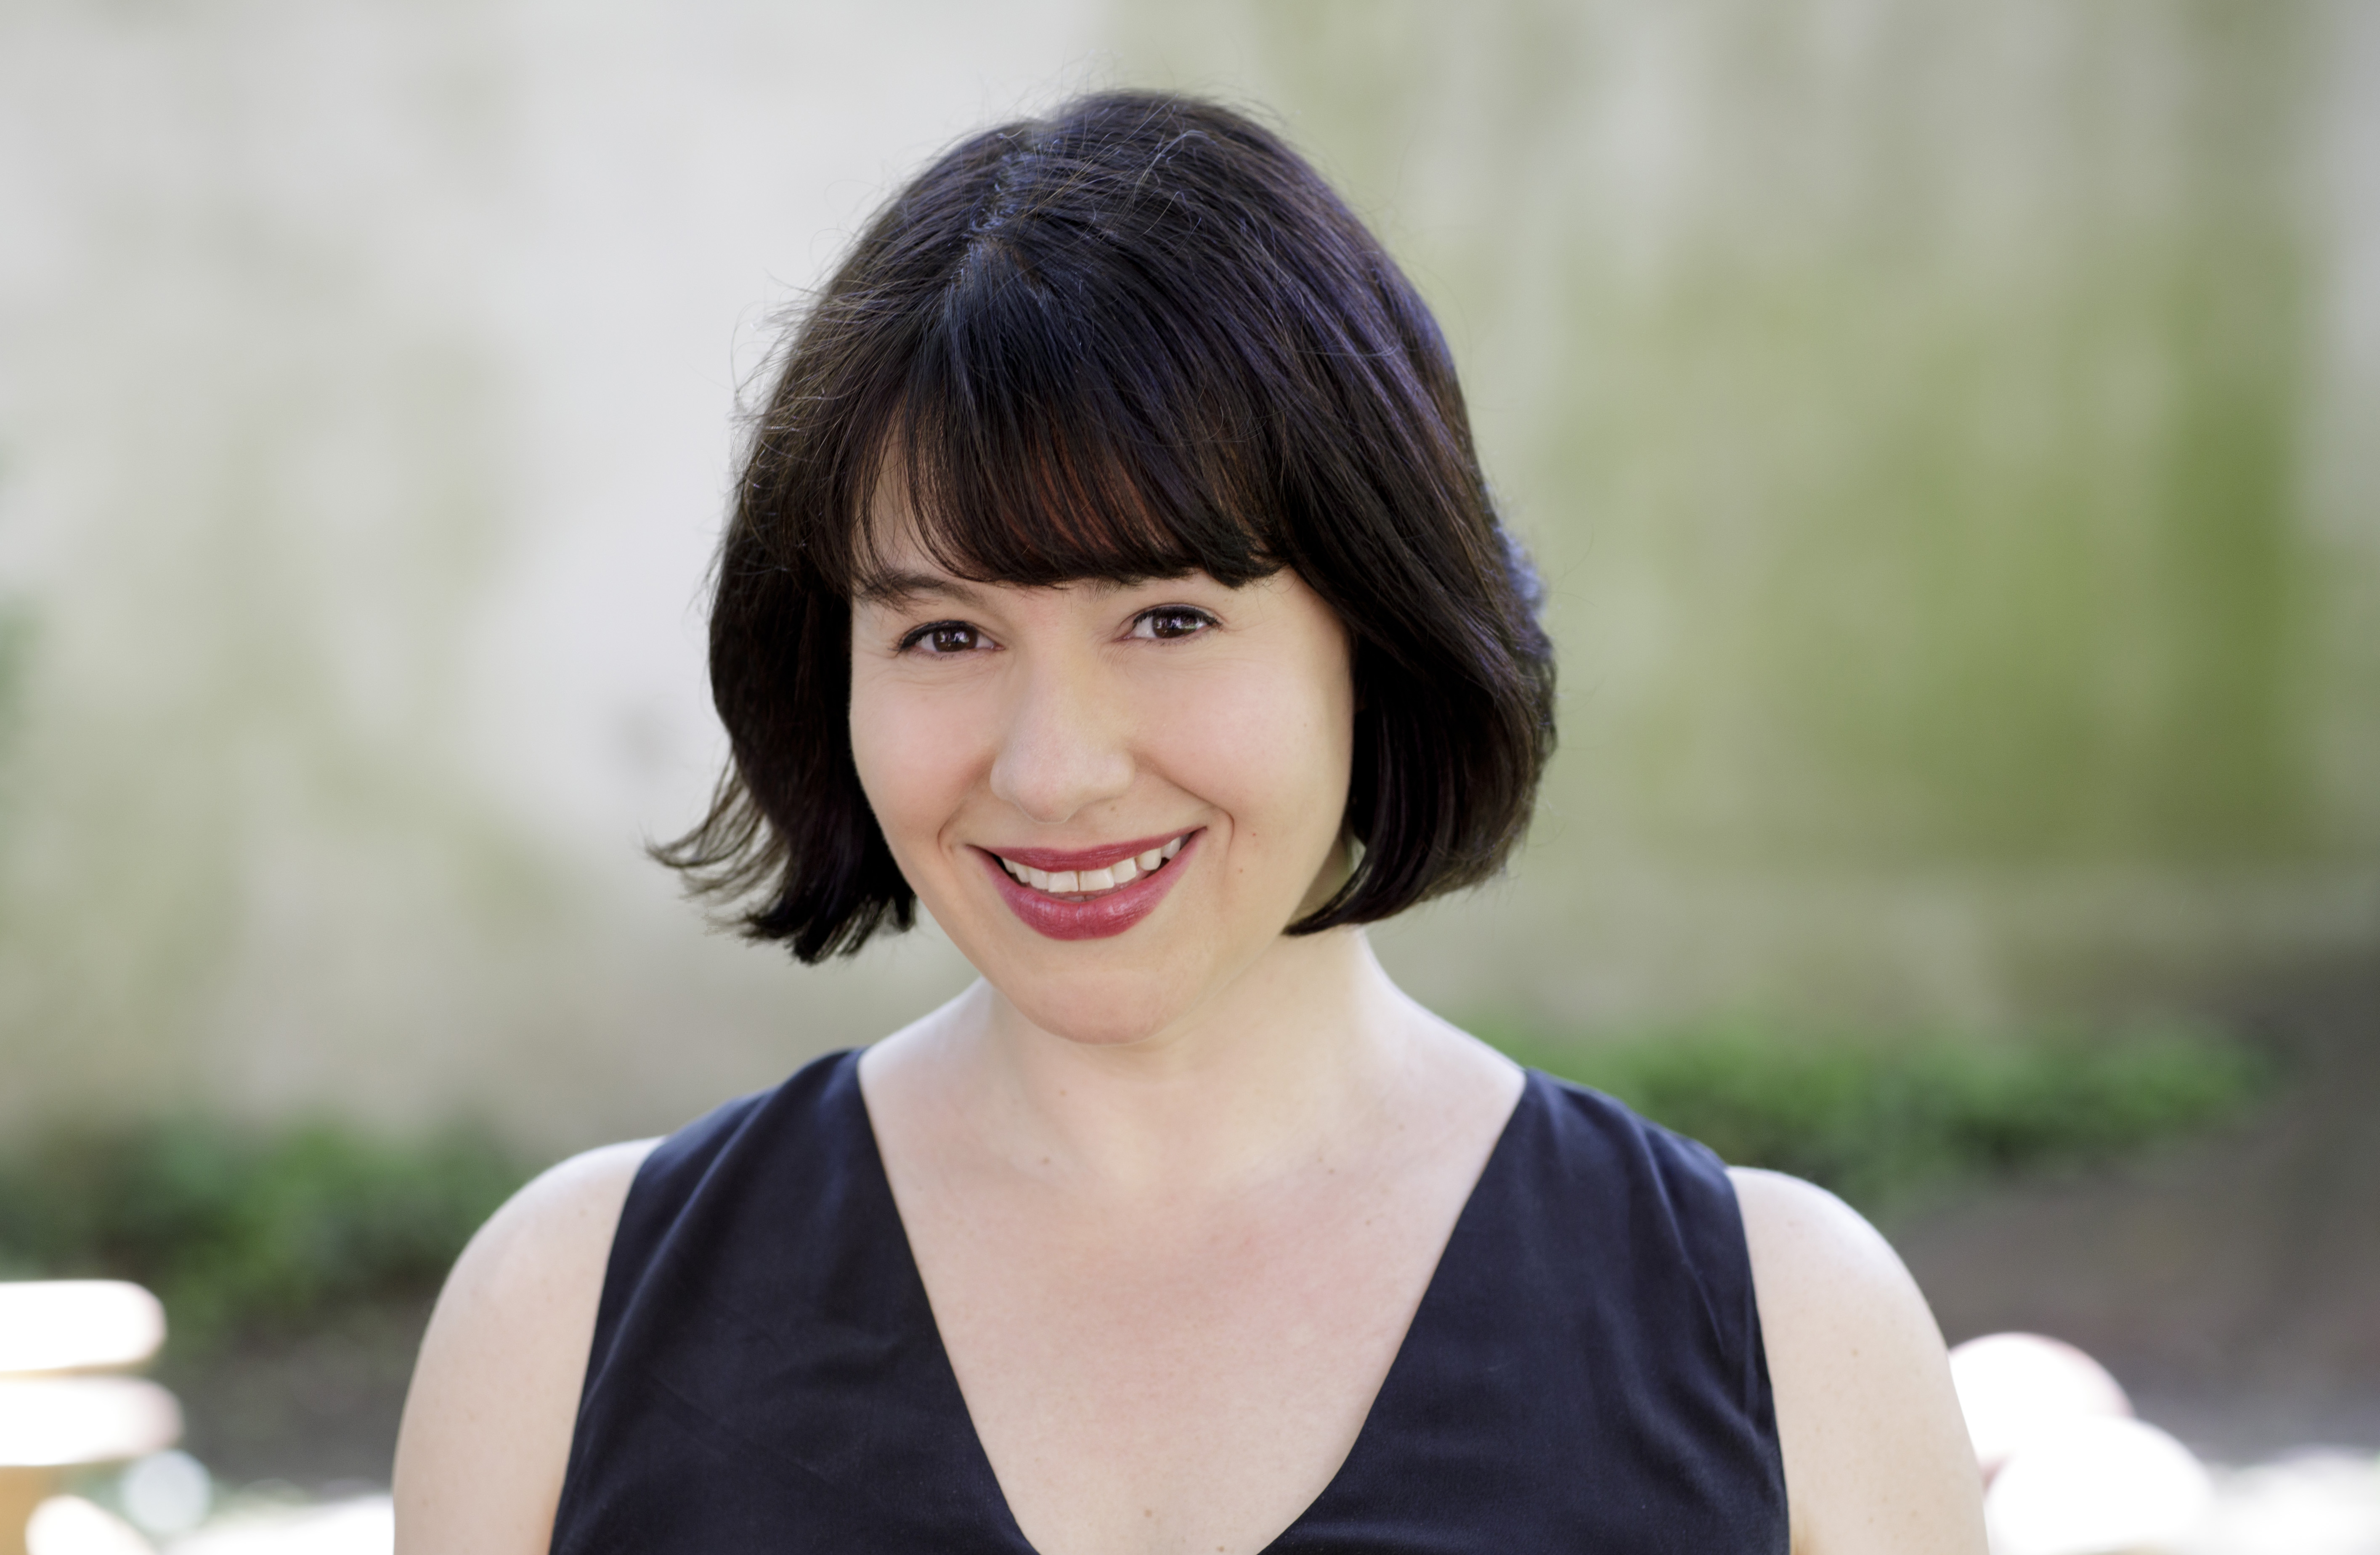 outdoor image of Michelle Goldberg smiling